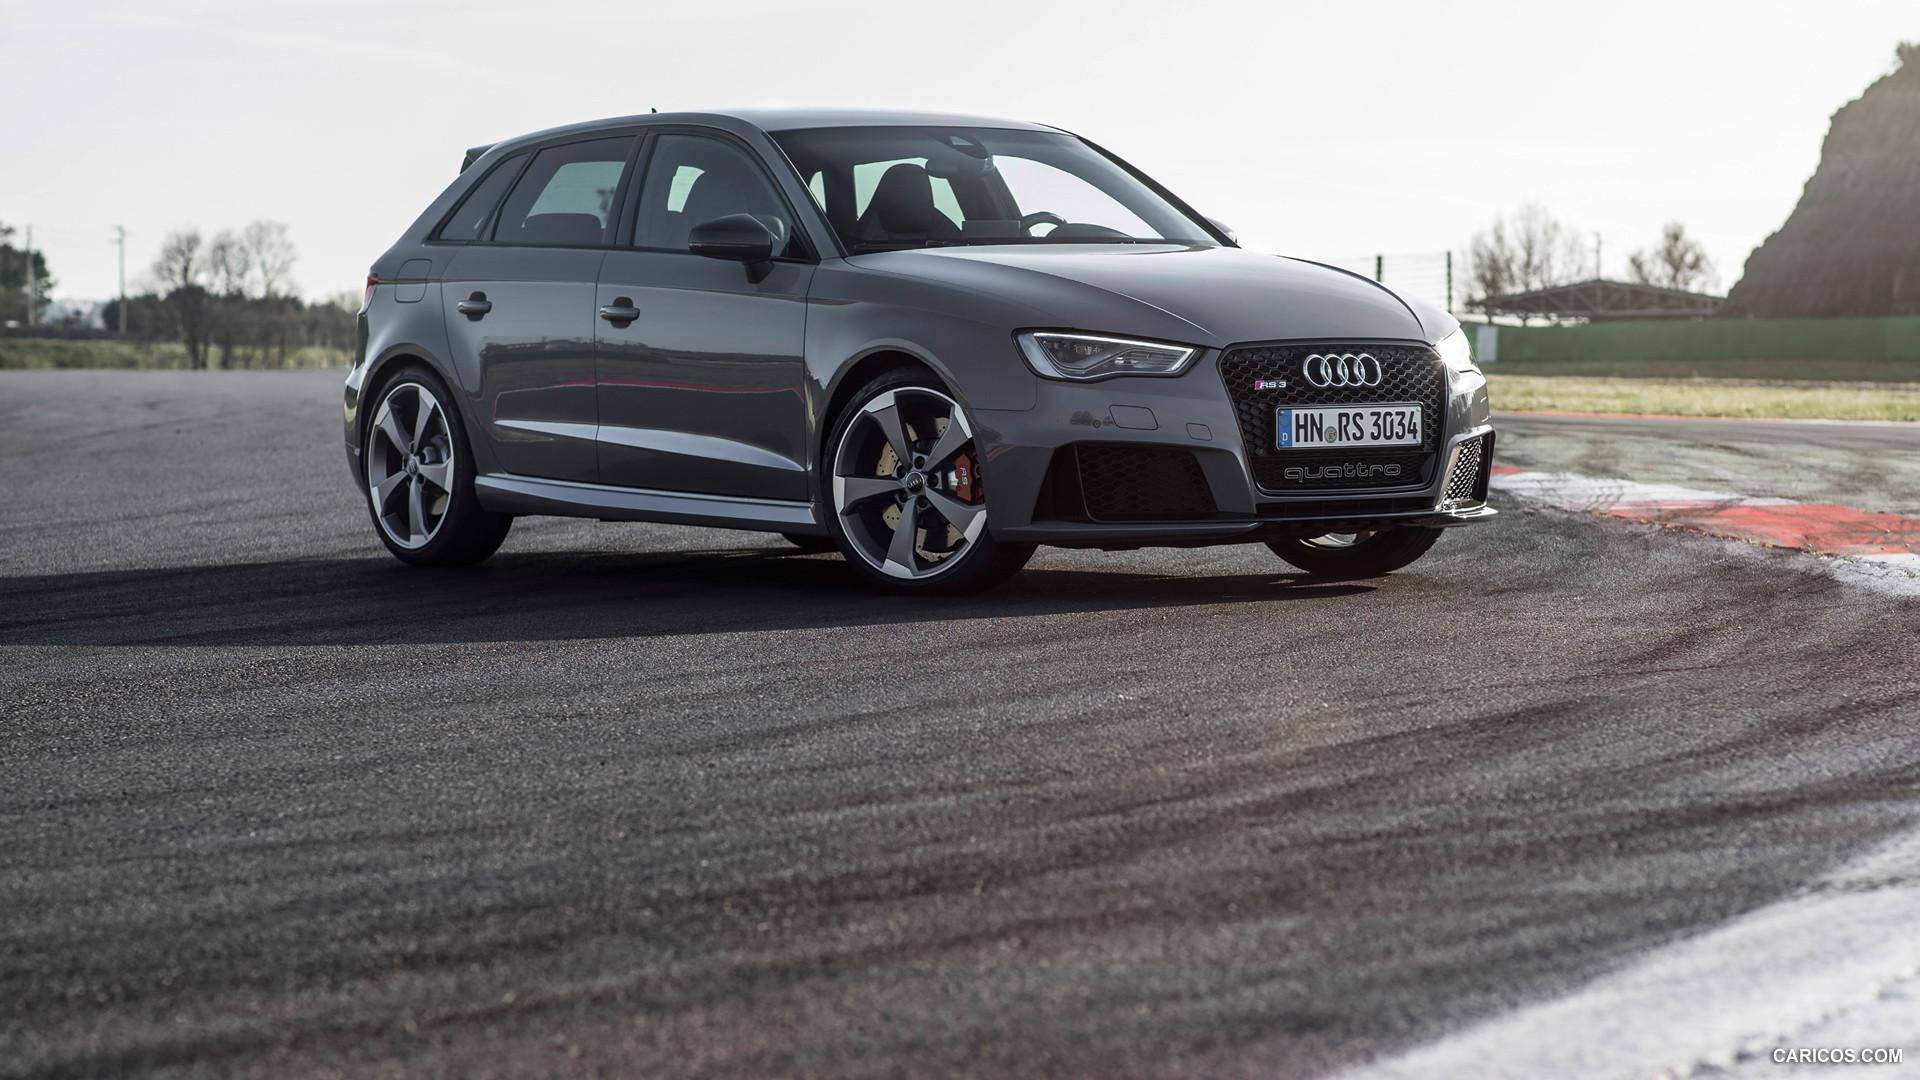 Gray 2016 Audi Rs 3 Background